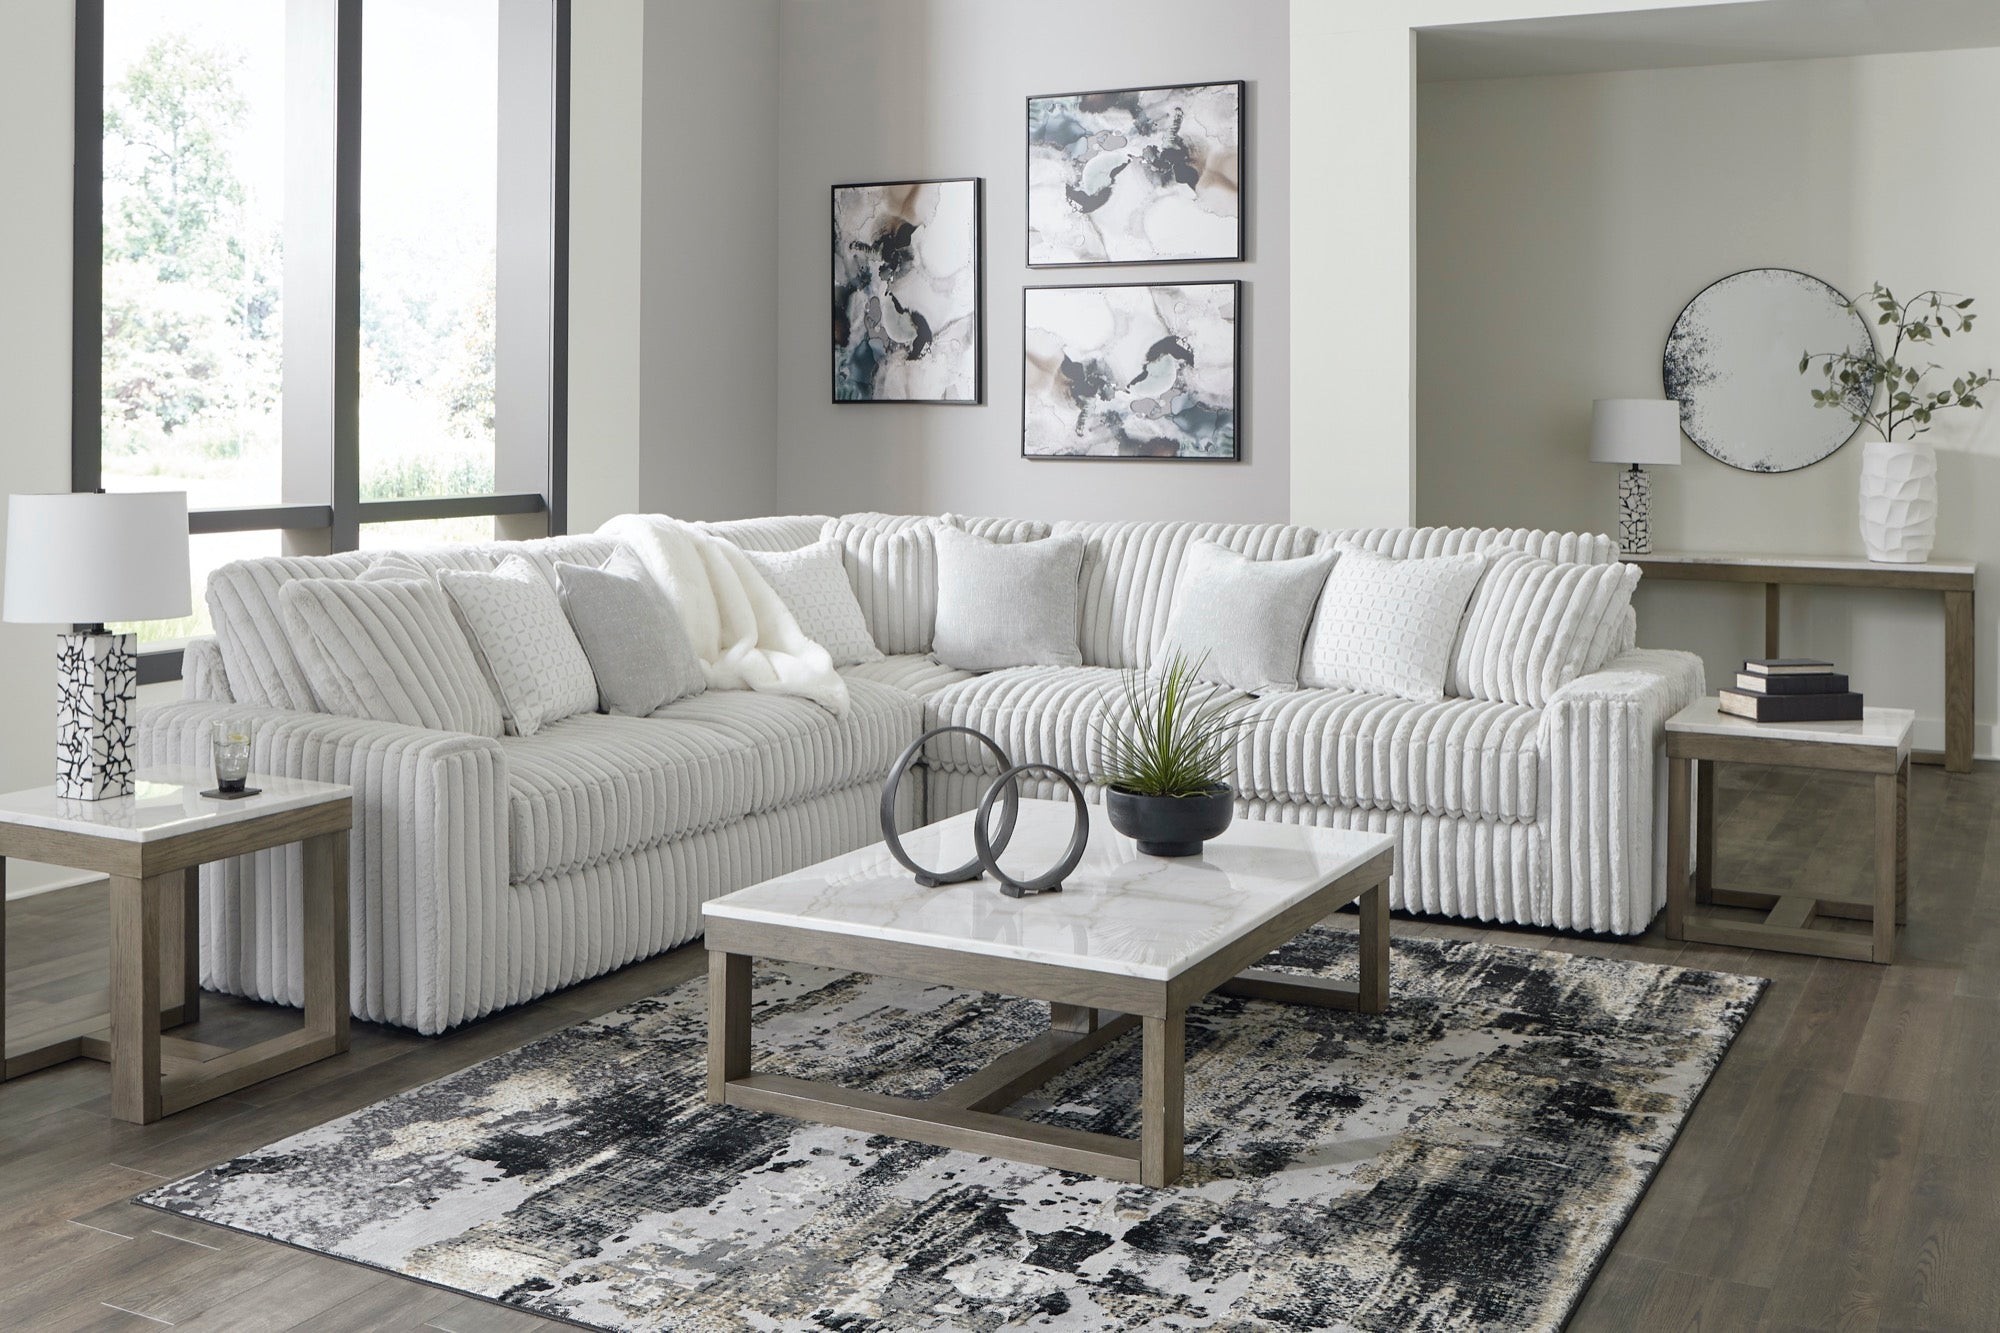 Stupendous Sectional